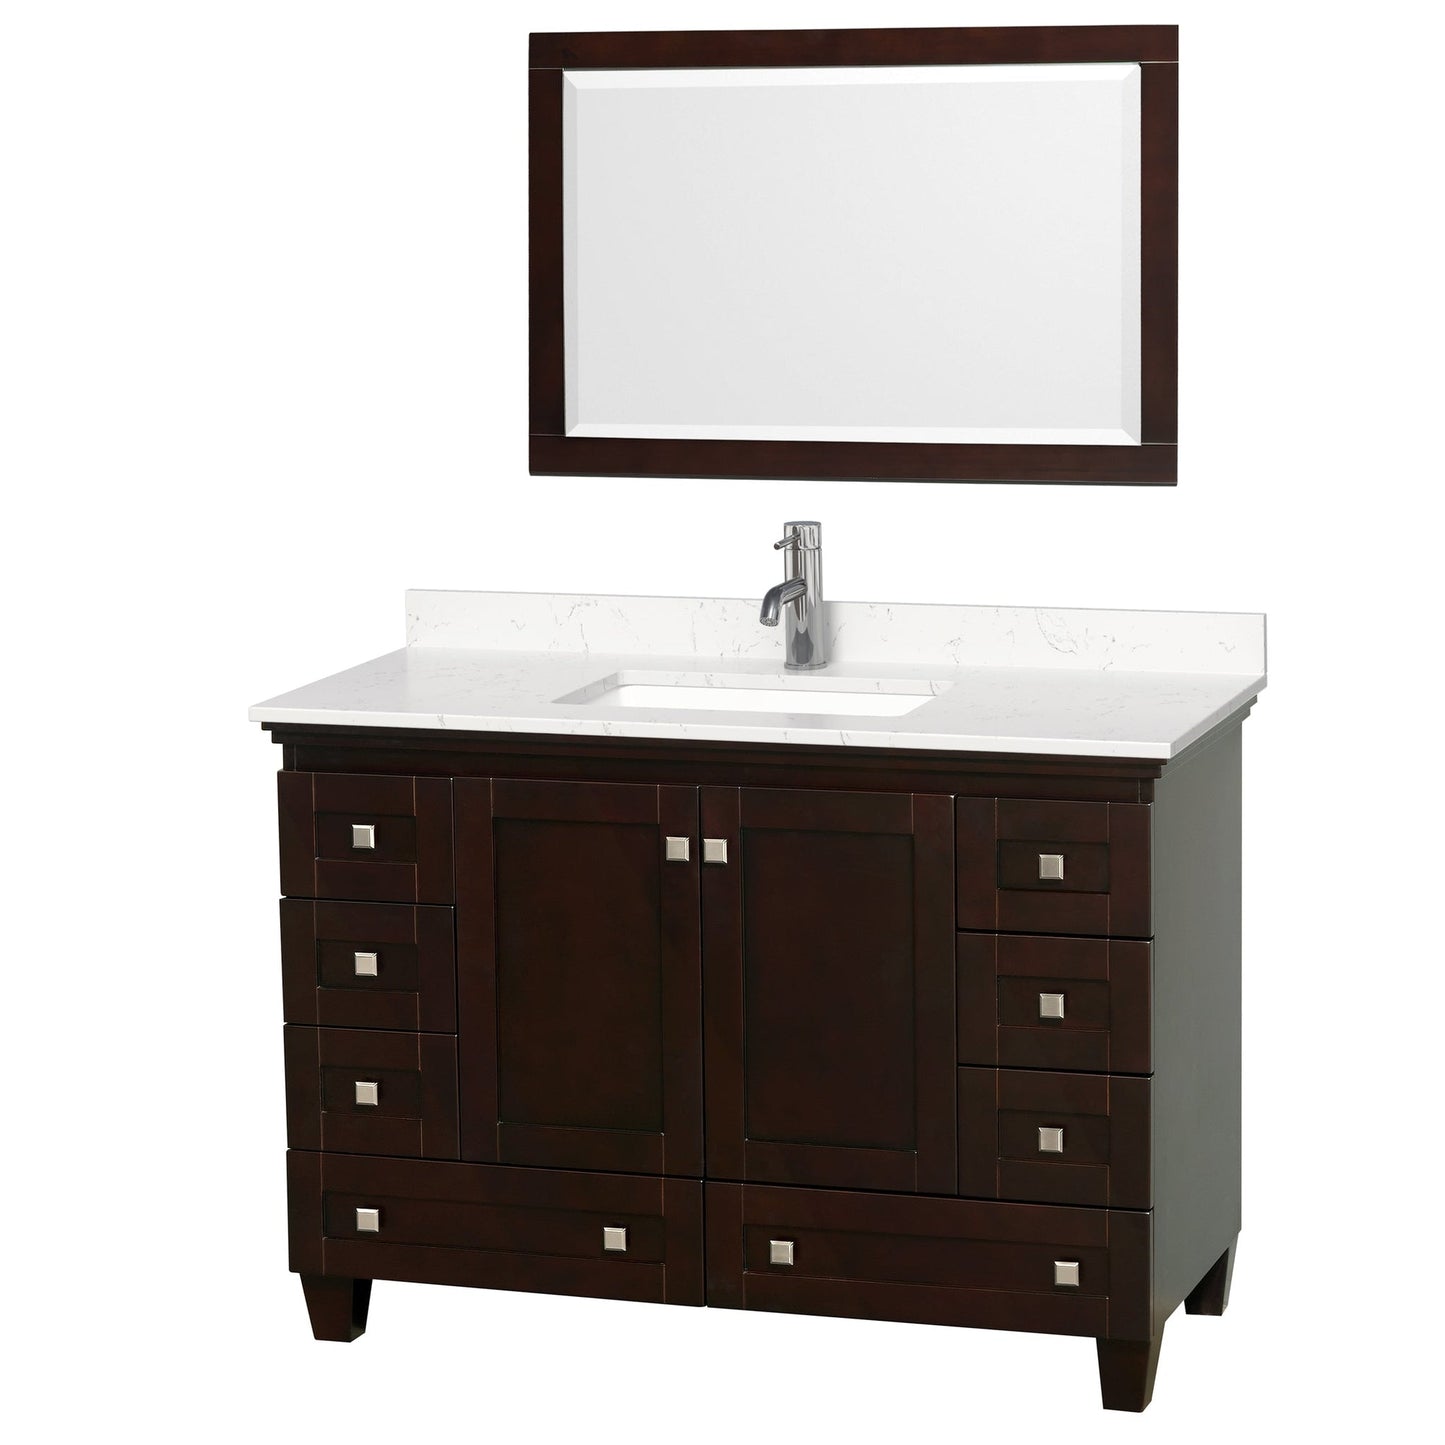 Wyndham Collection Acclaim 48" Single Bathroom Espresso Vanity Set With Light-Vein Carrara Cultured Marble Countertop And Undermount Square Sink And 24" Mirror